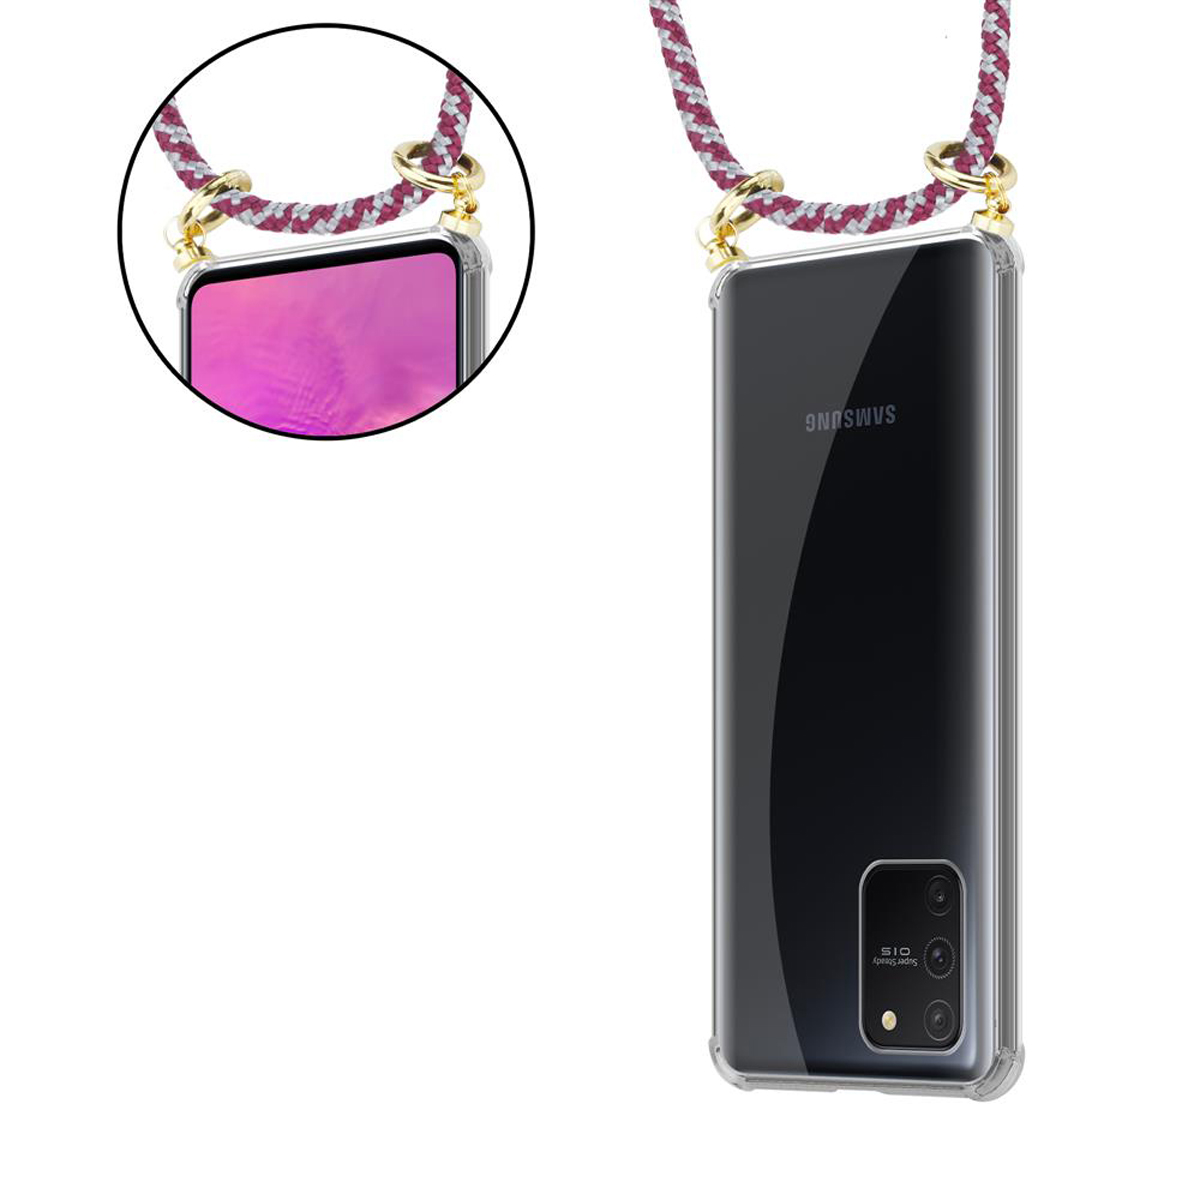 Ringen, ROT S10 LITE / abnehmbarer und M80s, Gold Backcover, WEIß Band Kordel CADORABO Samsung, Galaxy A91 Kette Handy mit Hülle, /